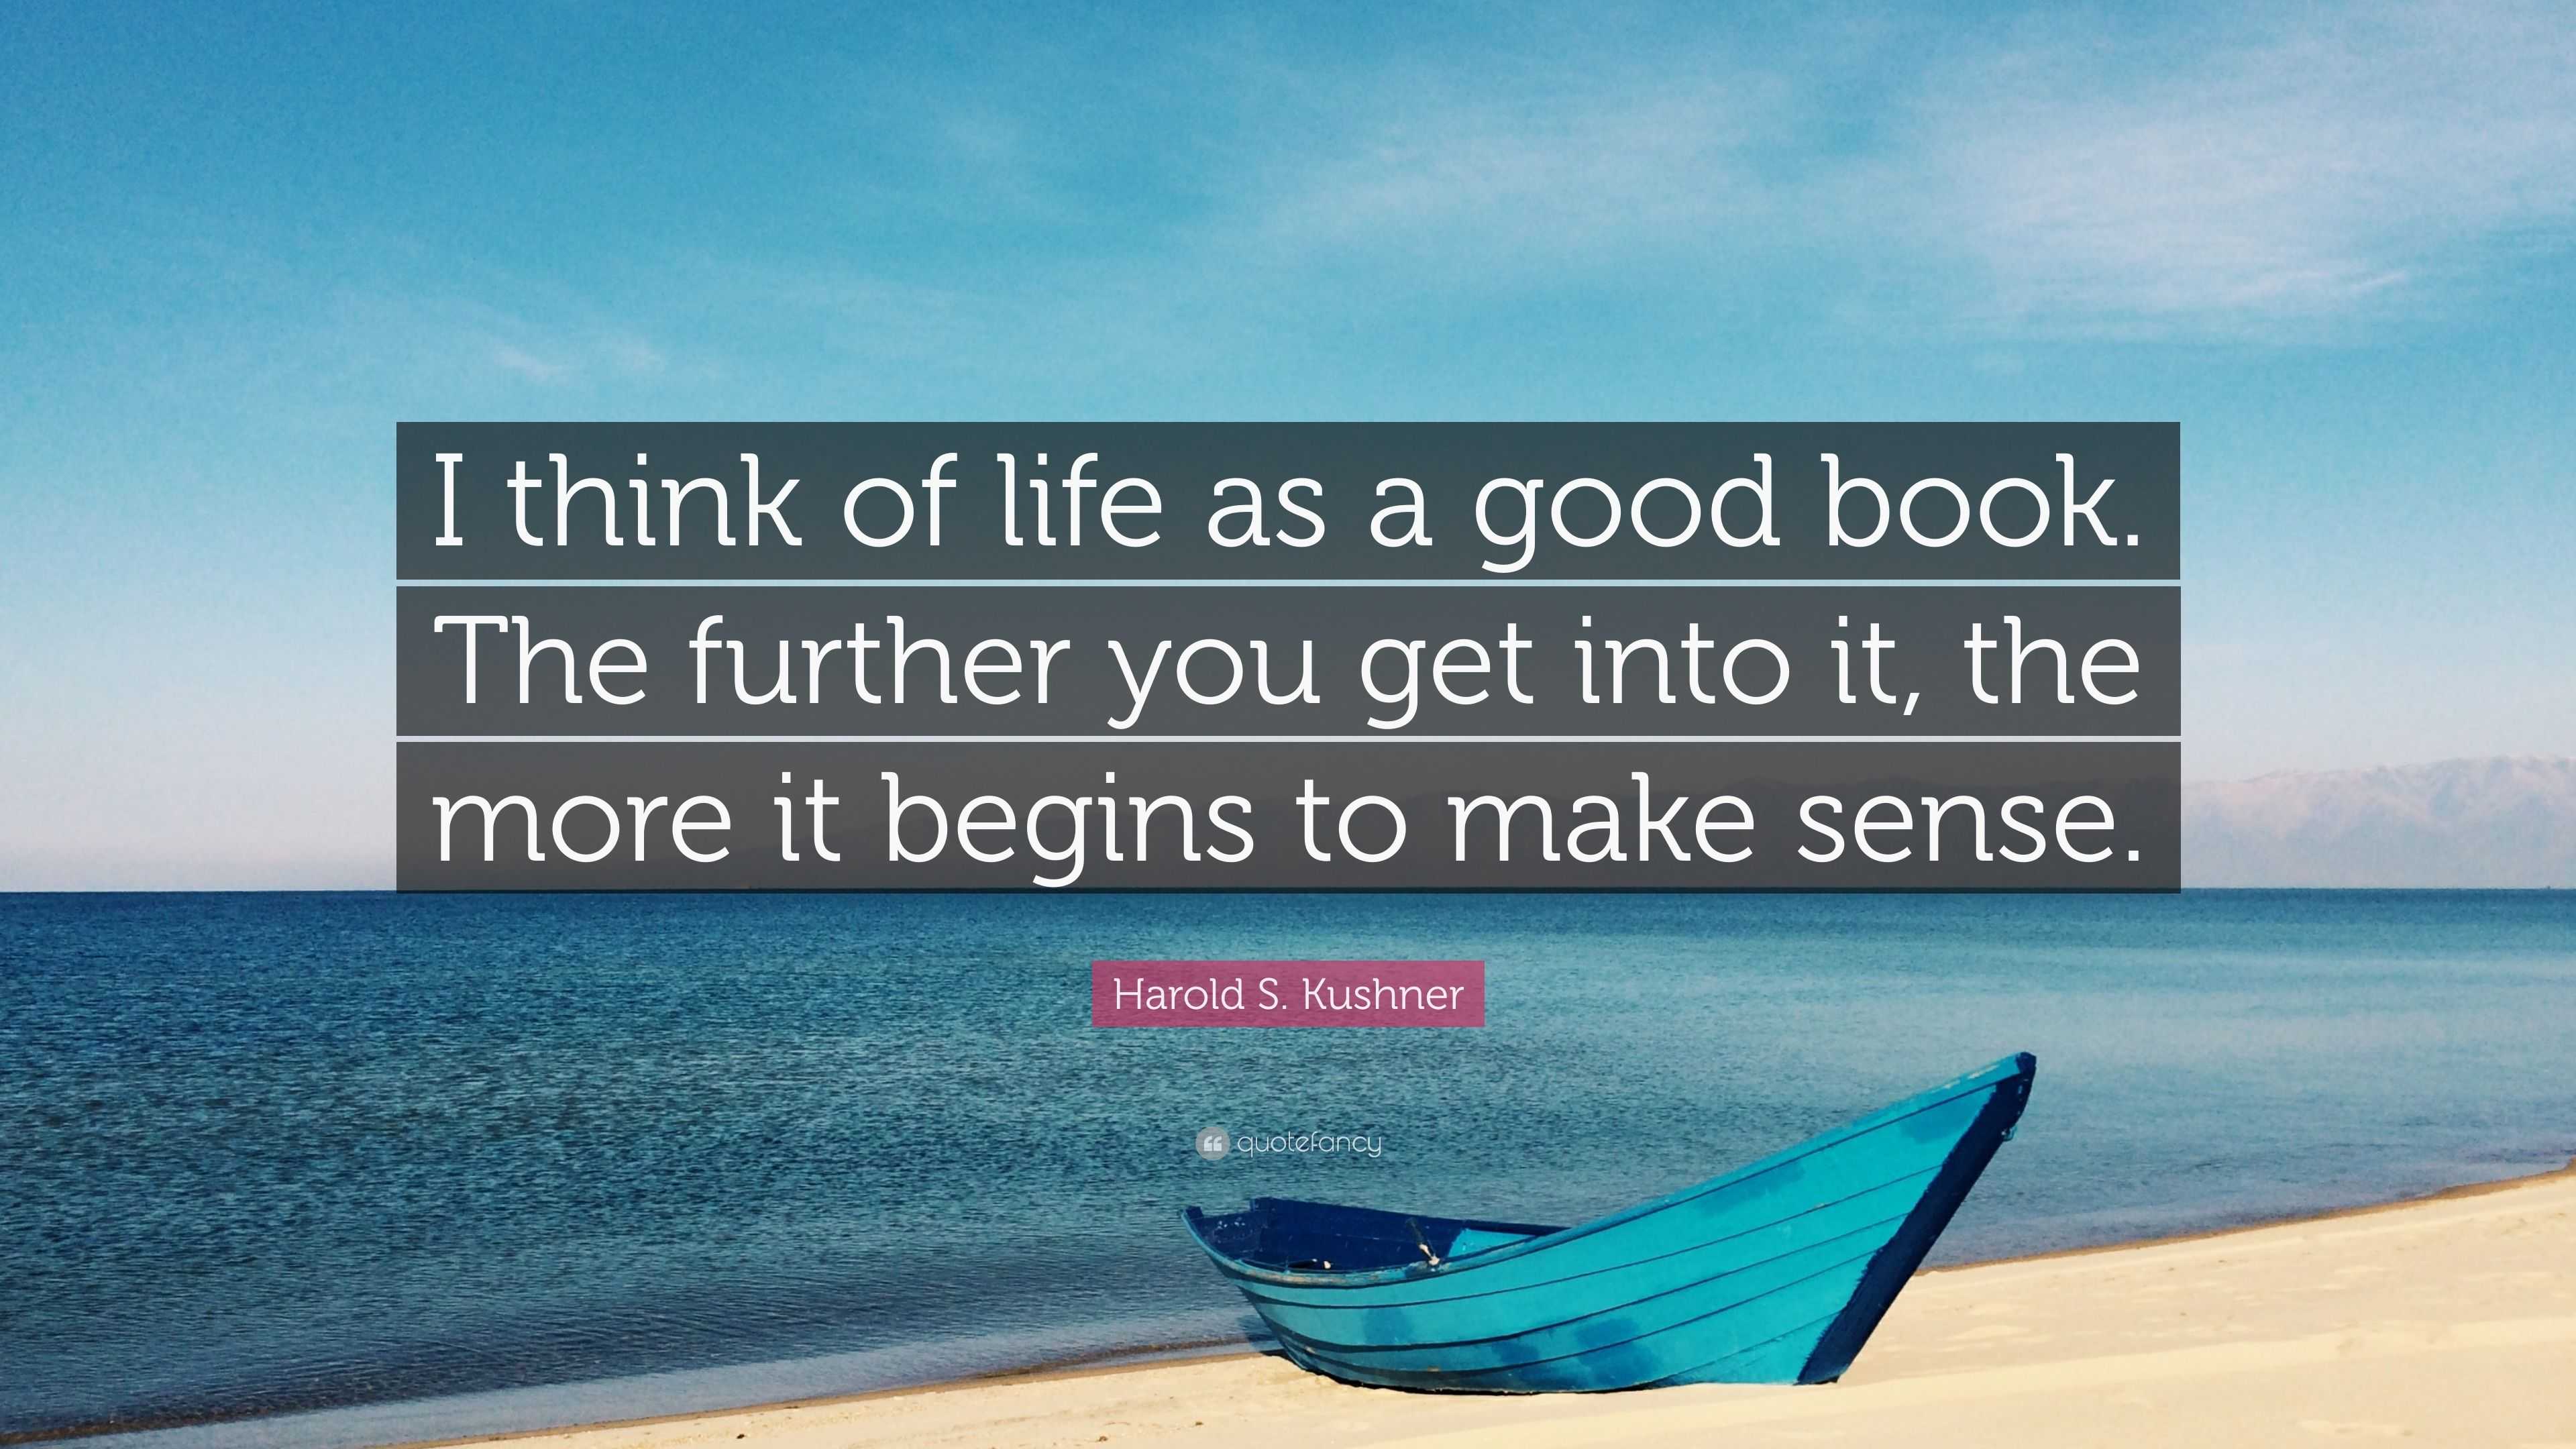 Harold S. Kushner Quote: “I think of life as a good book. The further ...